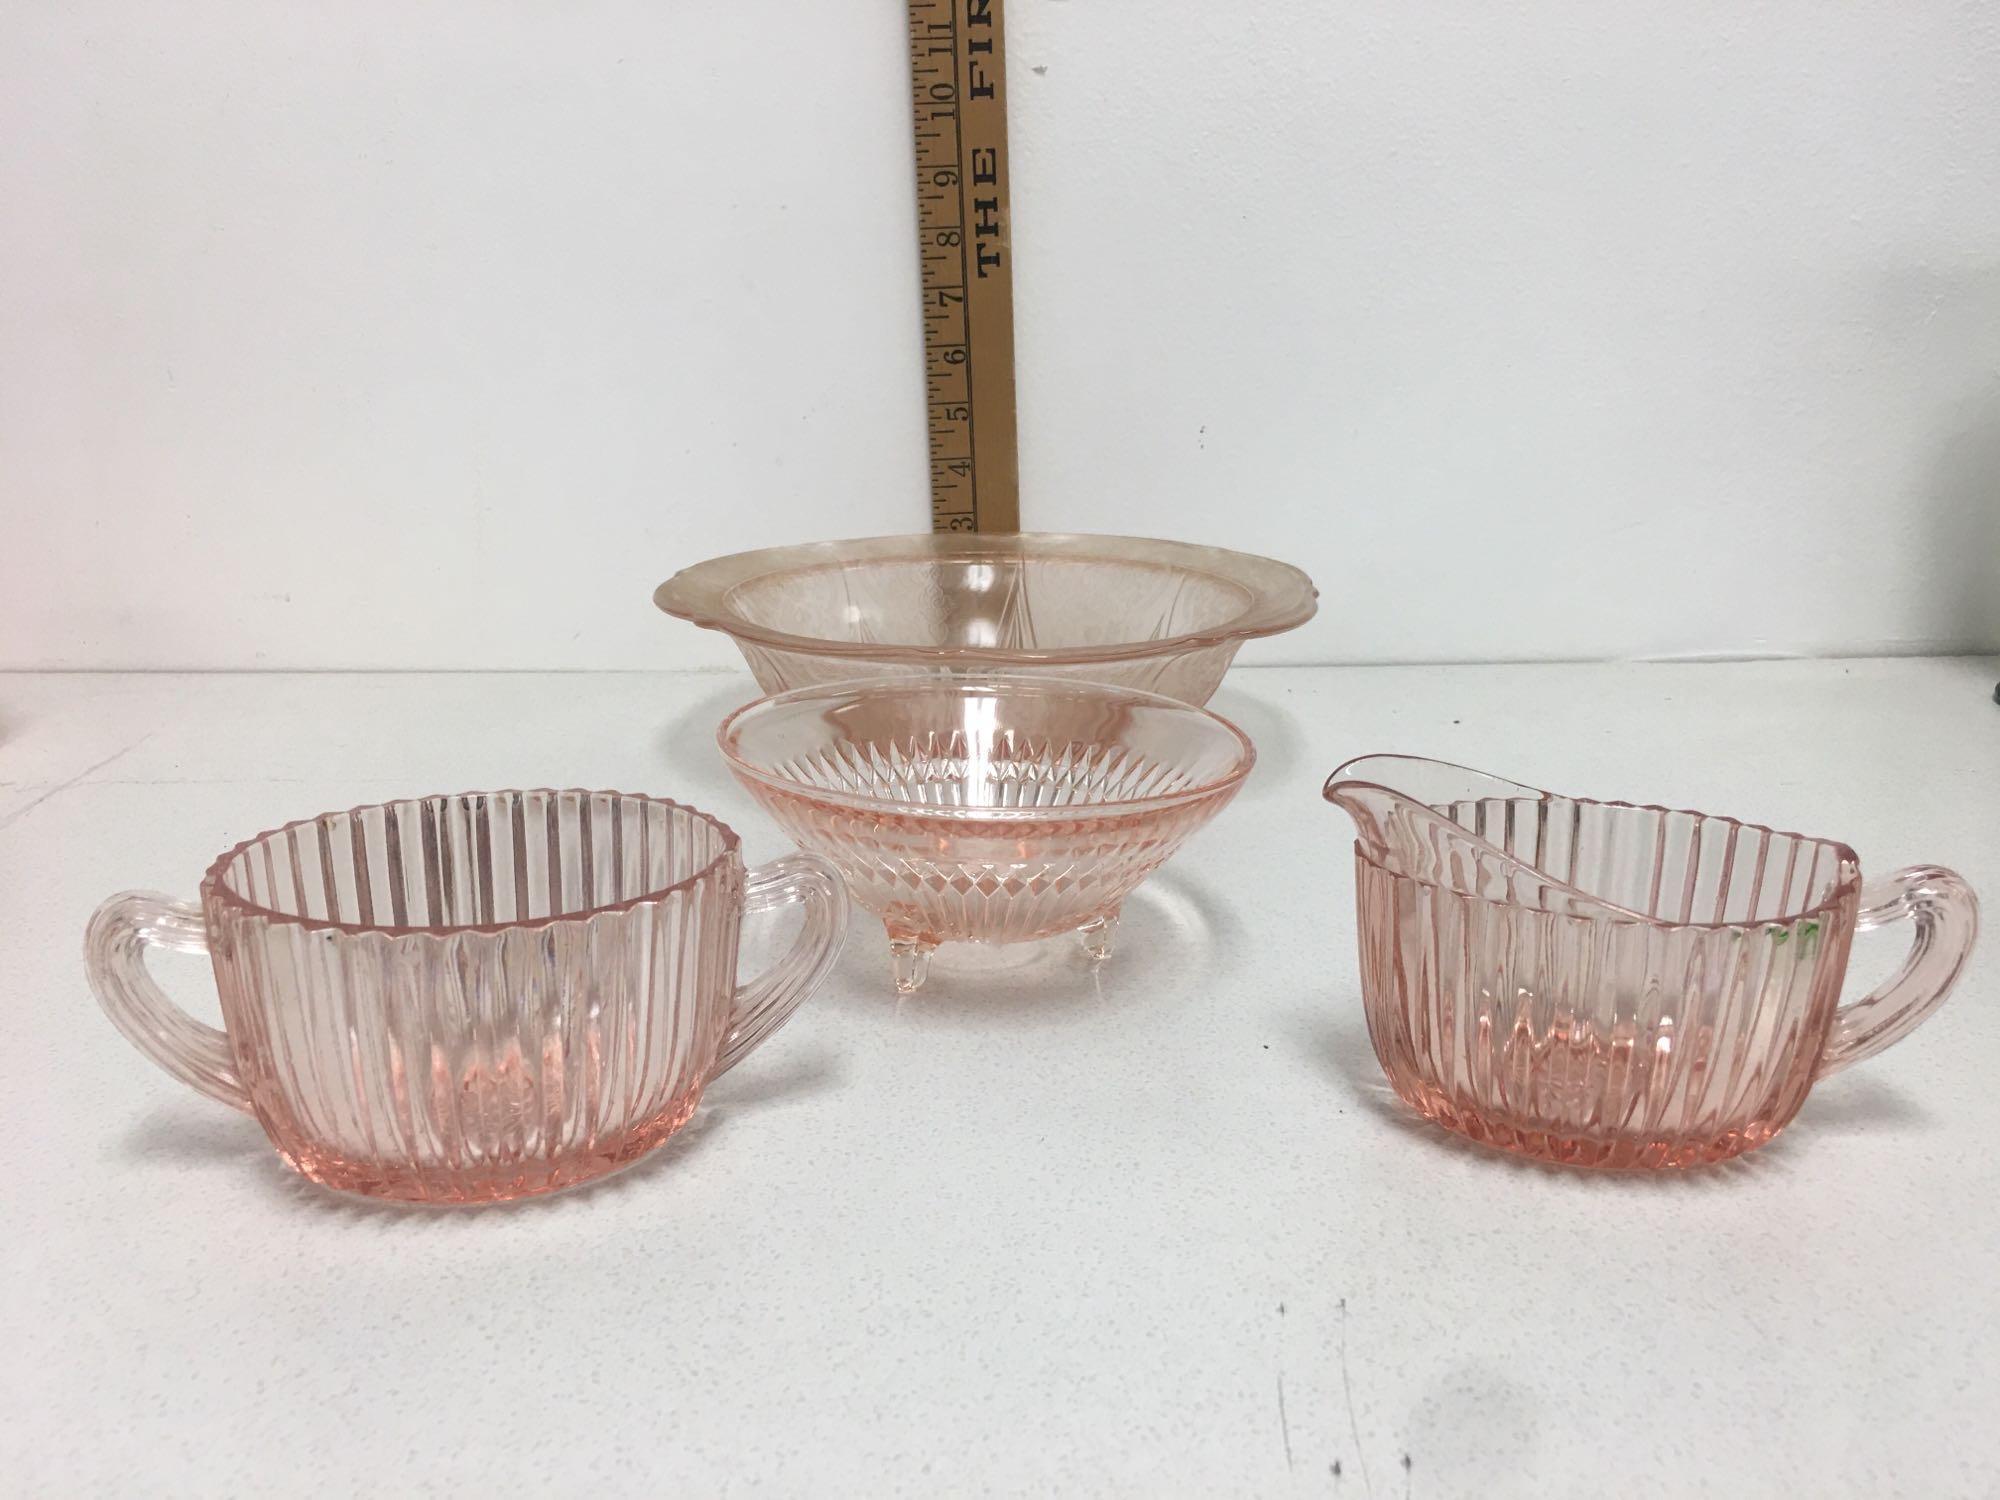 pink depression glass serving bowl and sugar & cream container